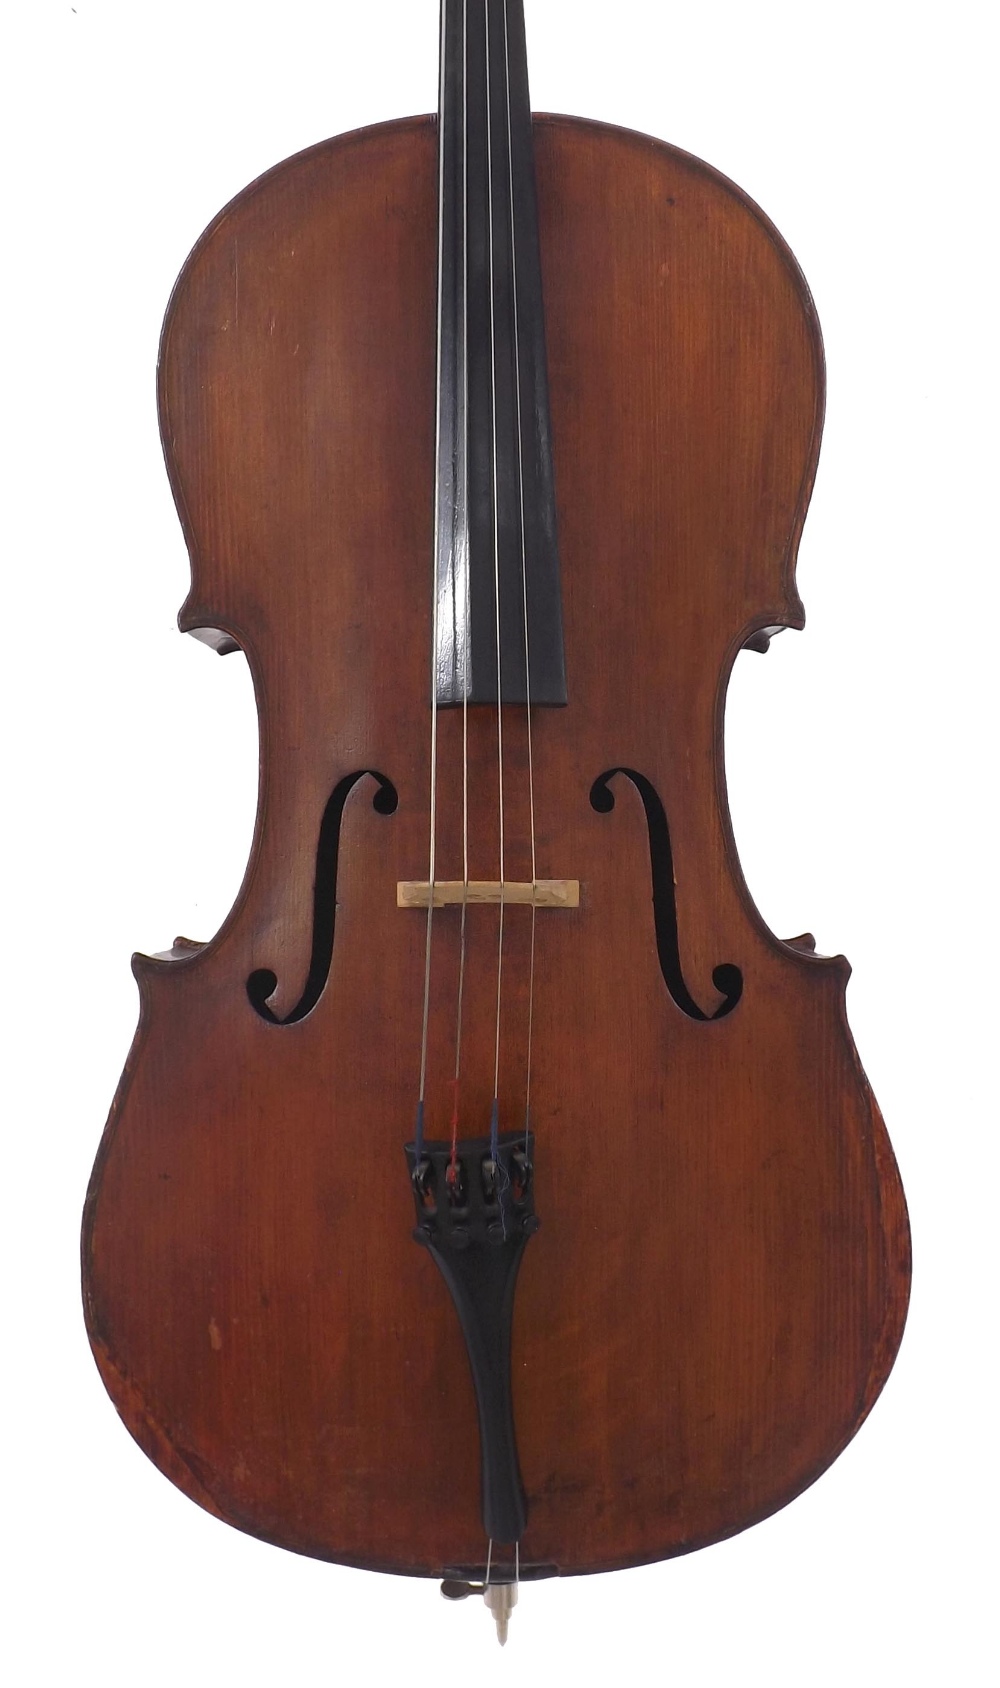 Early 20th century German violoncello, 29 7/8", 75.90cm, hard case and two nickel mounted